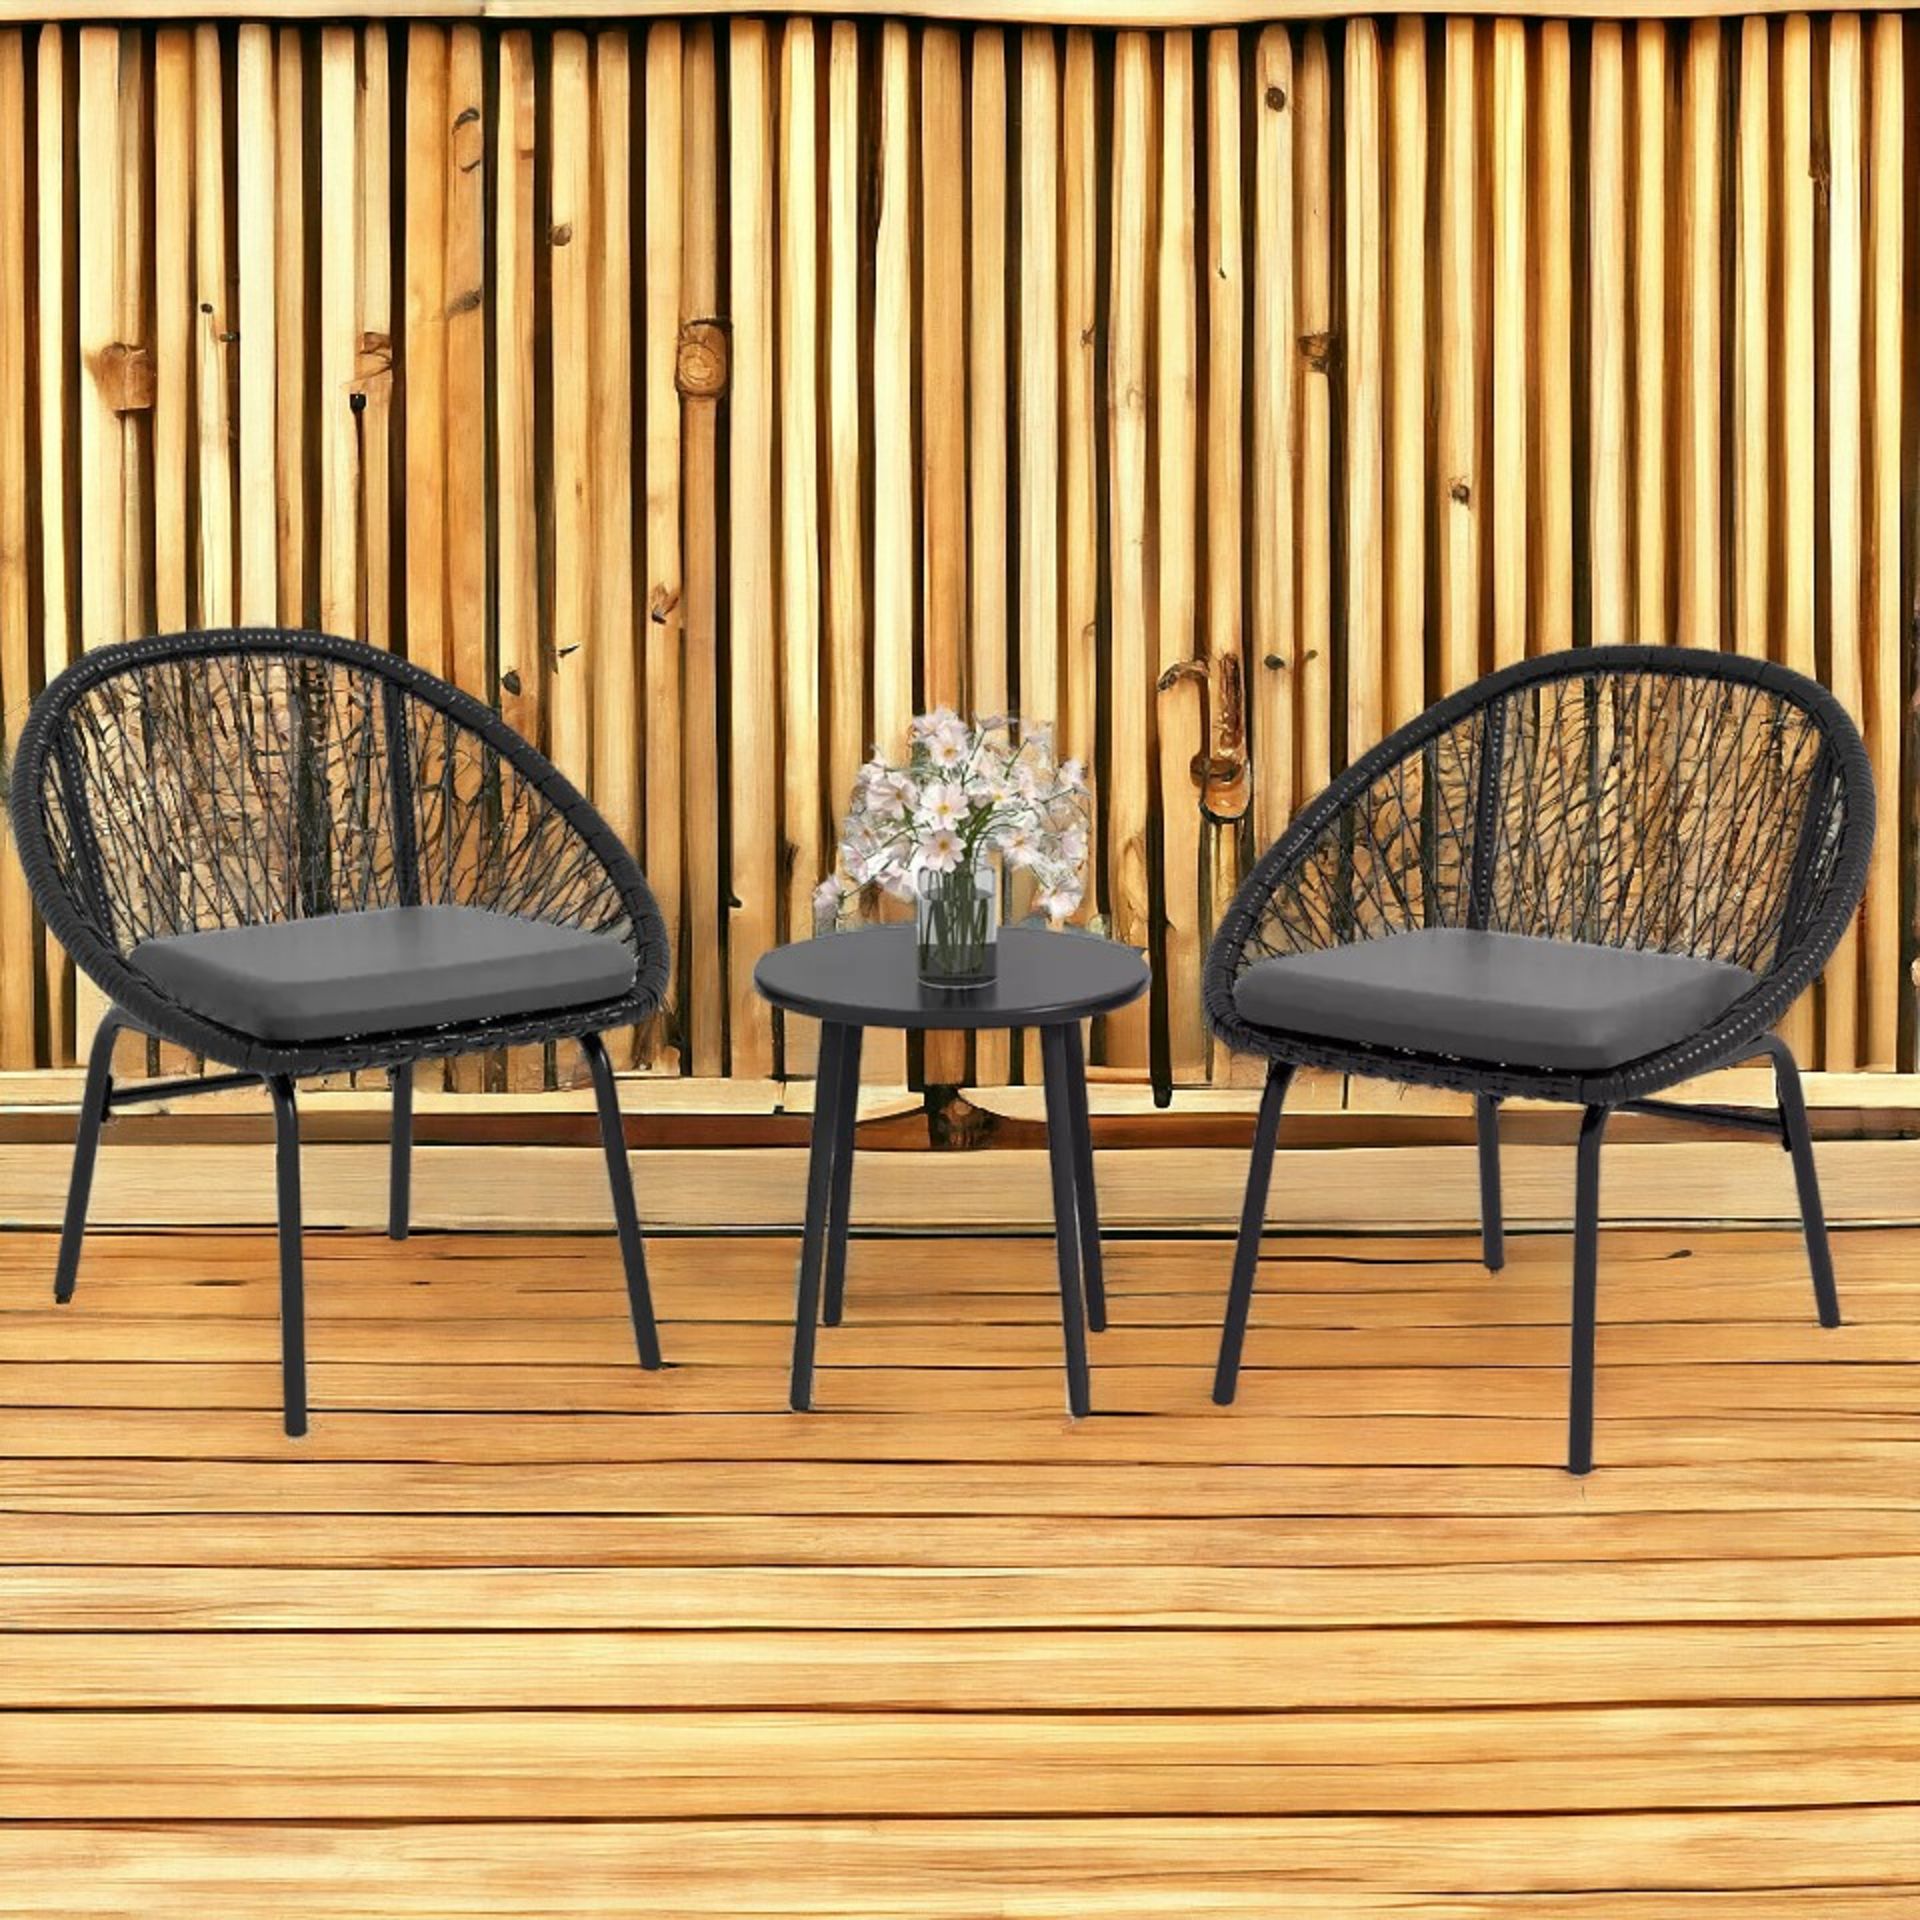 FREE DELIVERY - BRAND NEW 3 PIECE GARDEN FURNITURE SET, BISTRO SET W/ 2 CHAIRS & 1 COFFEE TABLE - Image 2 of 2